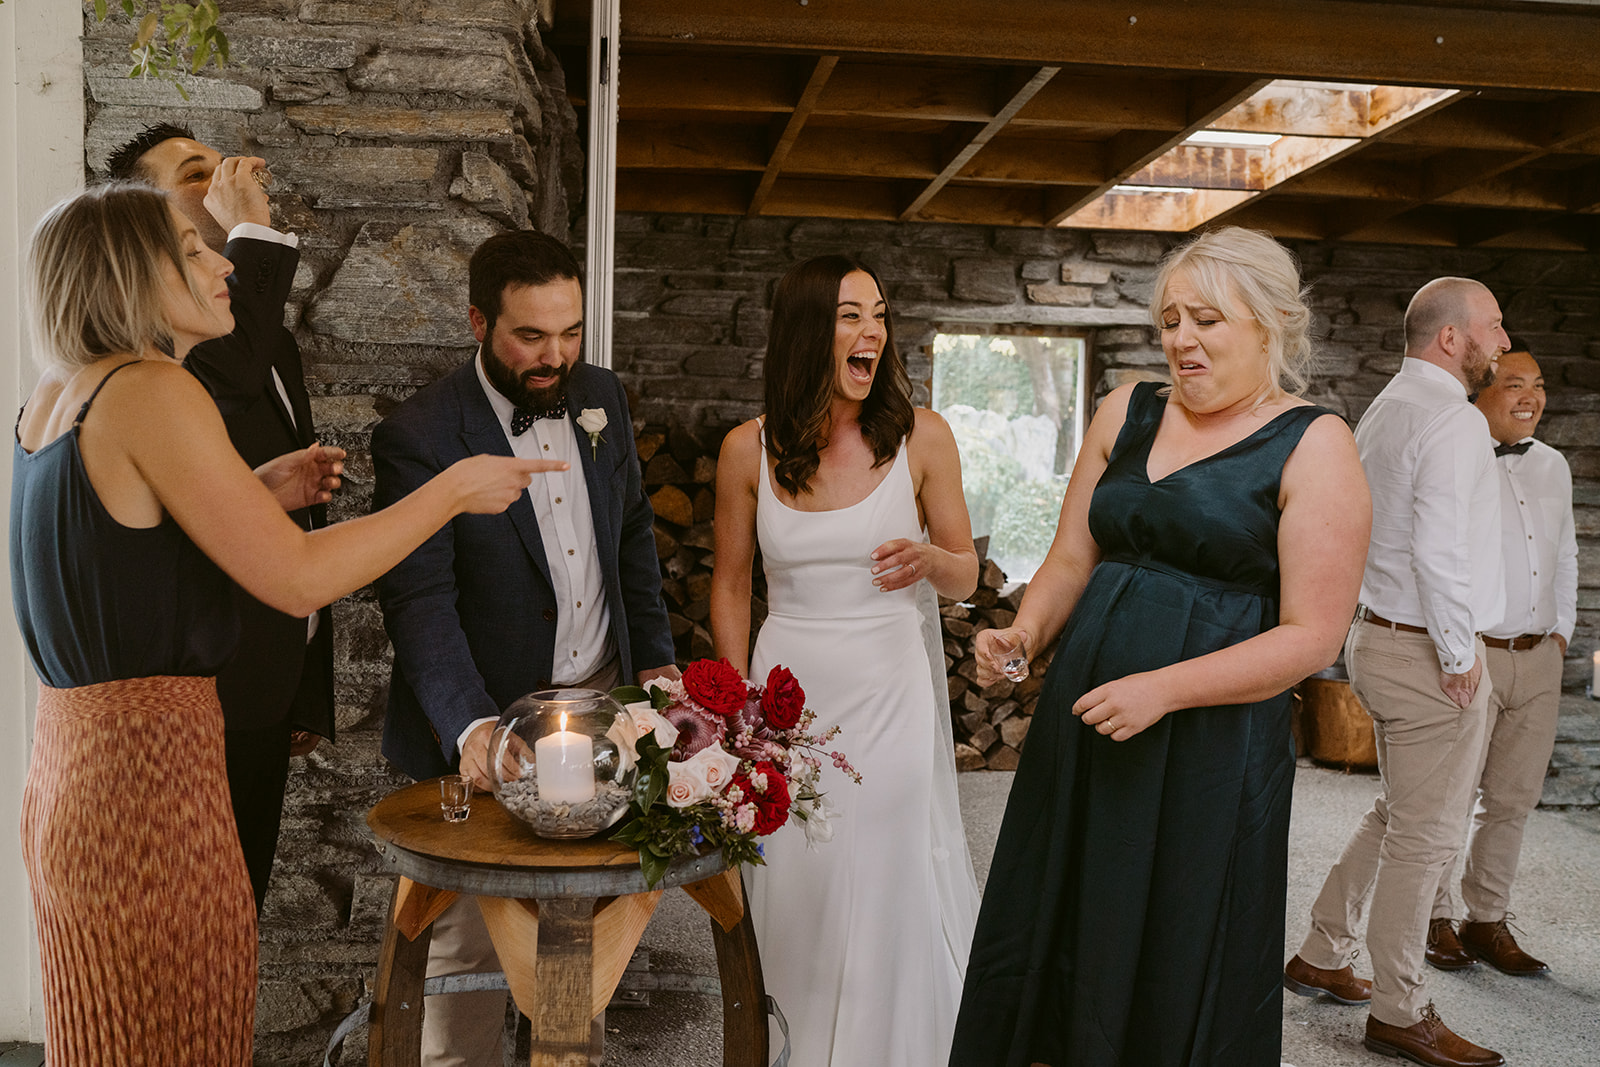 bride and groom take shots with celebrant and witnesses during wedding ceremony at Winehouse in Queenstown, New Zealand